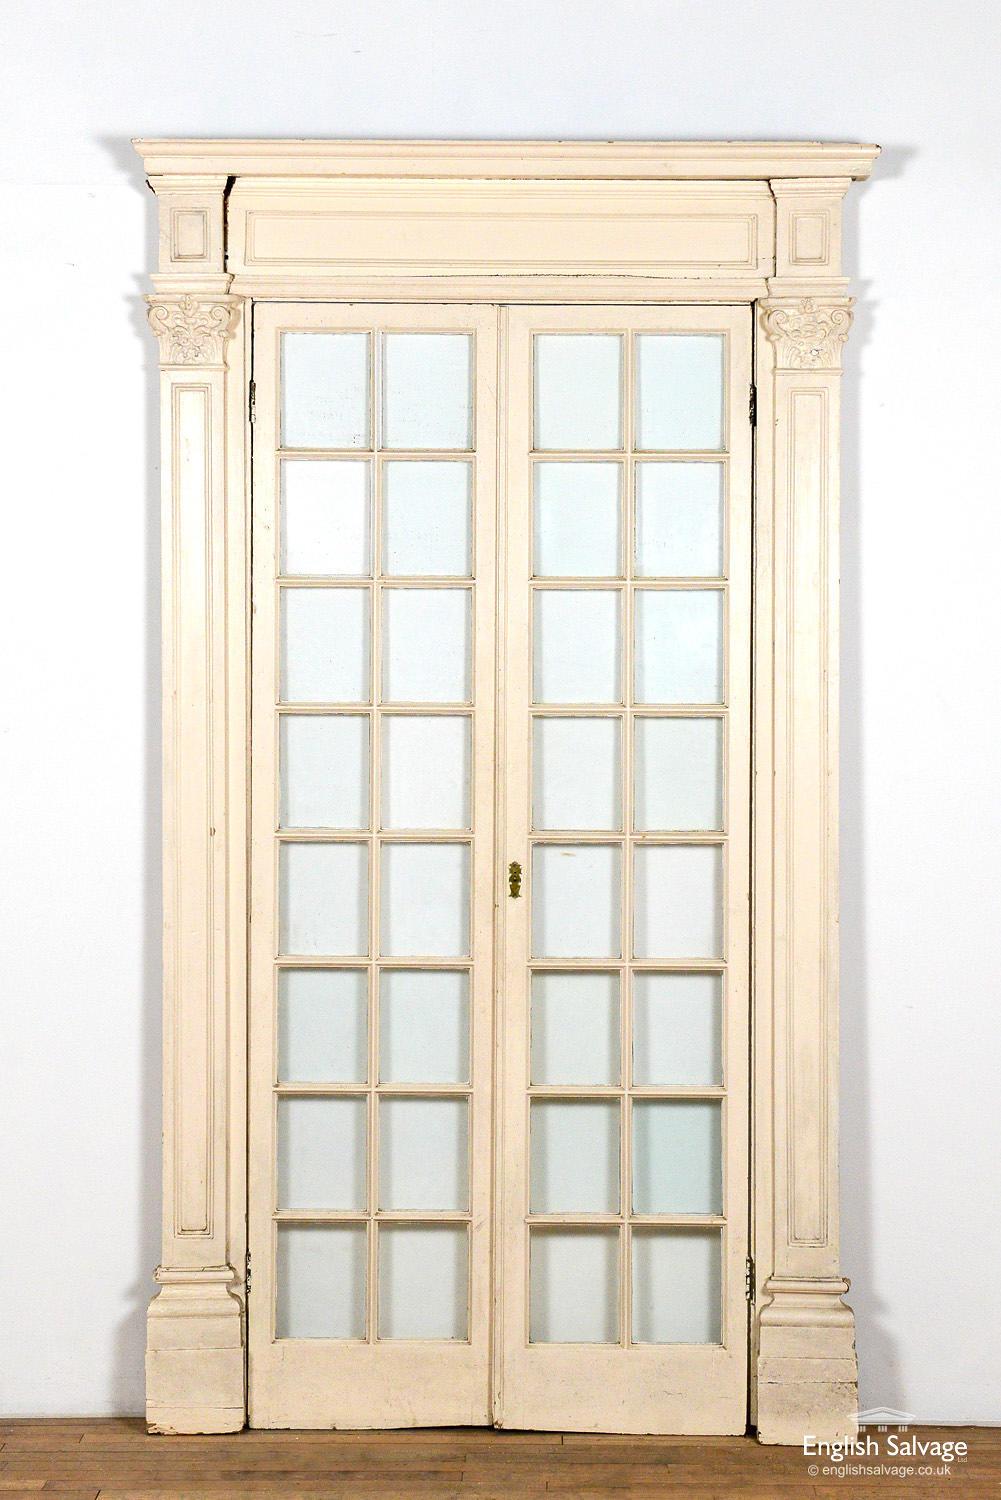 19th Century pine double glazed doors in a decorative surround. Original glass present. Some scuffs and splits commensurate with age Doors without surround measure 218cm high x 97cm wide.